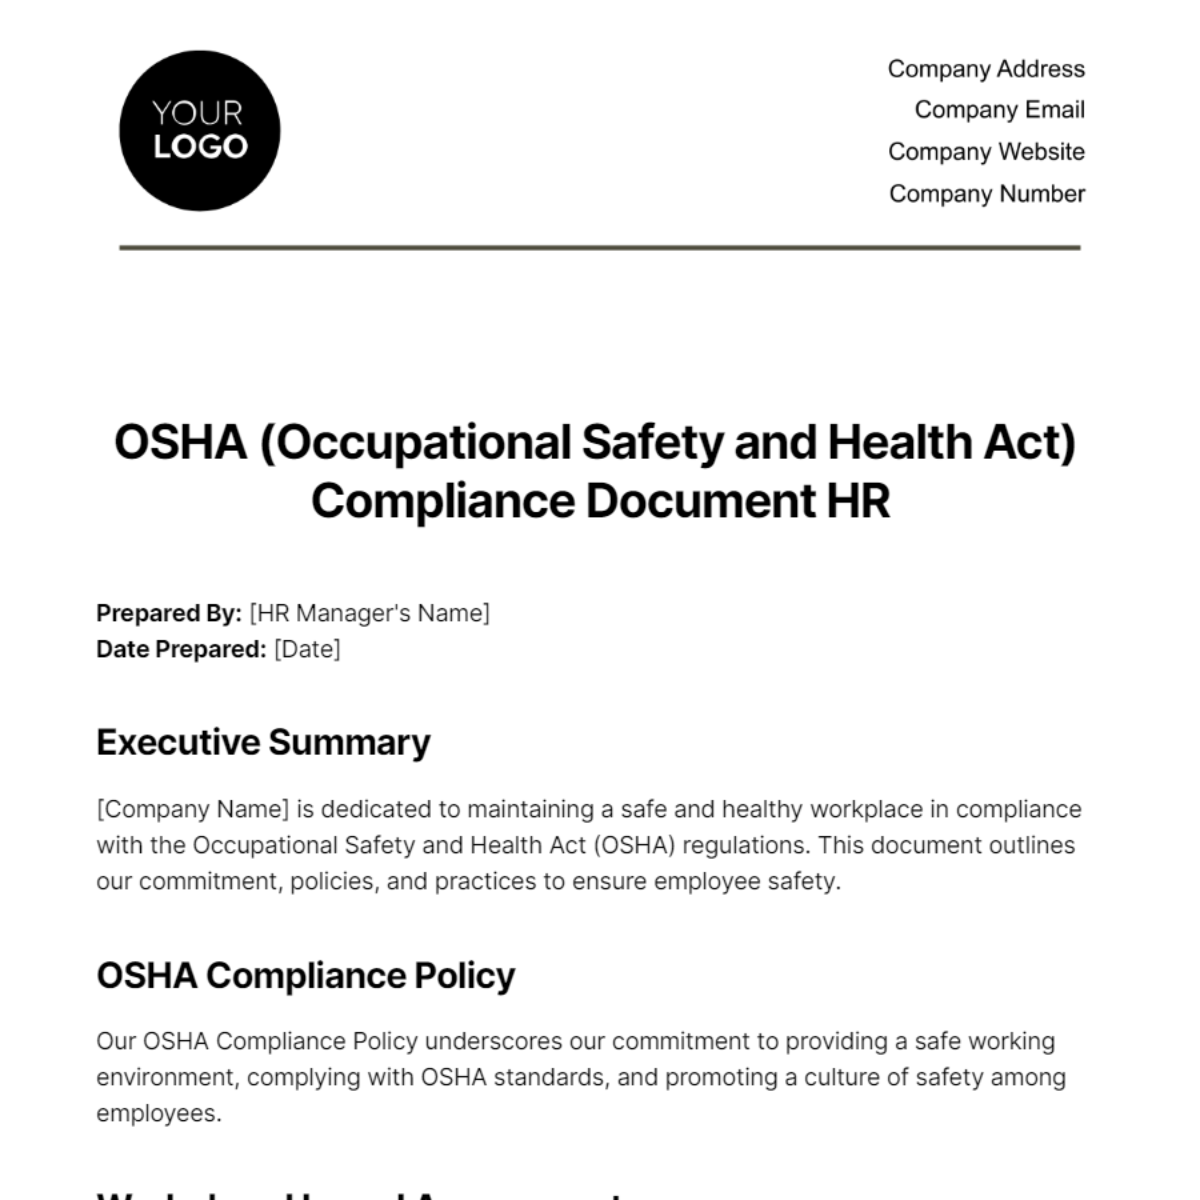 OSHA (Occupational Safety and Health Act) Compliance Document HR Template